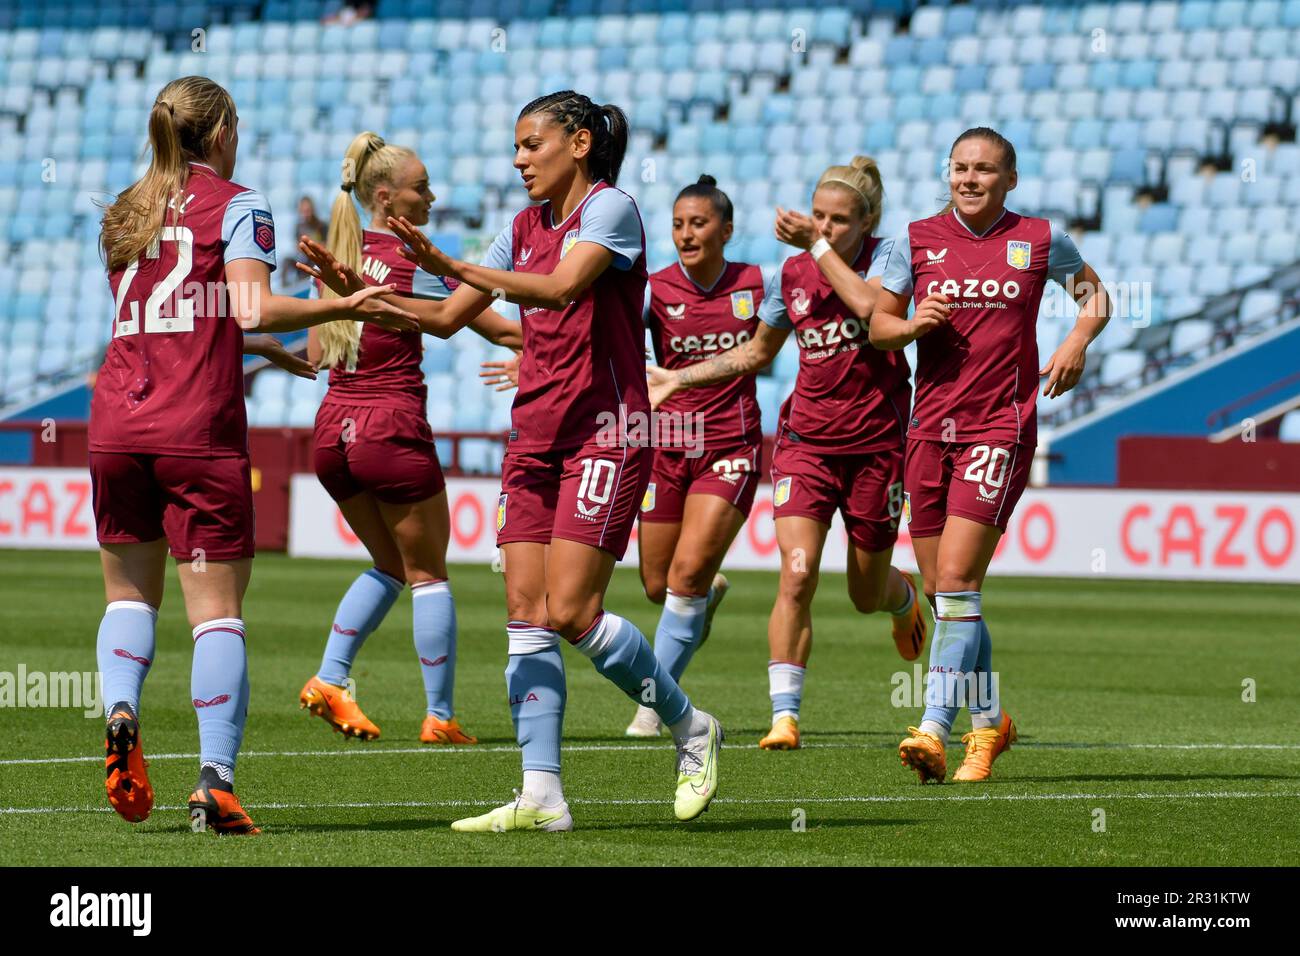 Birmingham, England. 21 May 2023. Aston Villa players celebrate their side's equalising goal to make the score 2-2 during the Barclays Women's Super League game between Aston Villa and Liverpool at Villa Park in Birmingham, England, UK on 21 May 2023. Credit: Duncan Thomas/Majestic Media/Alamy Live News. Stock Photo